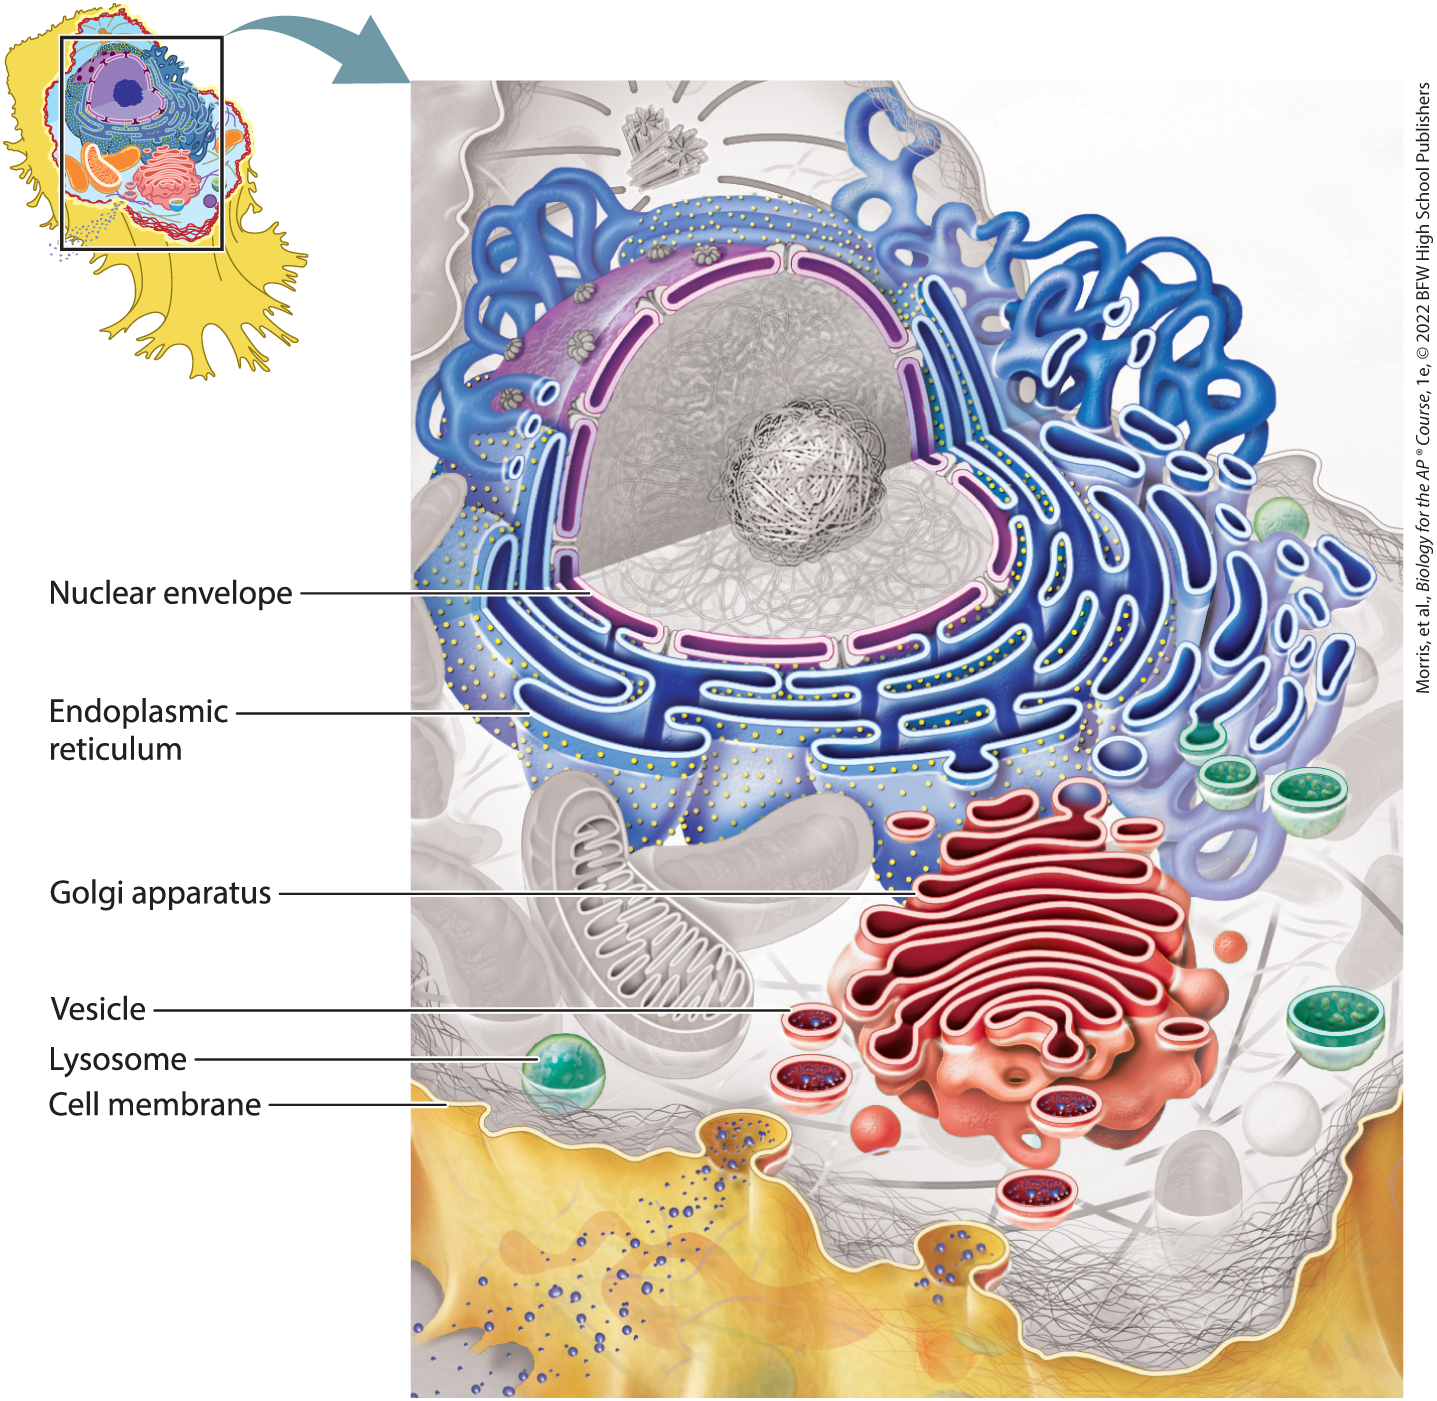 <p>the interconnected membranes of the cell; present in eukaryotic cells; includes the cell membrane, nuclear envelope, endoplasmic reticulum, Golgi apparatus, lysosomes, and vesicles</p>